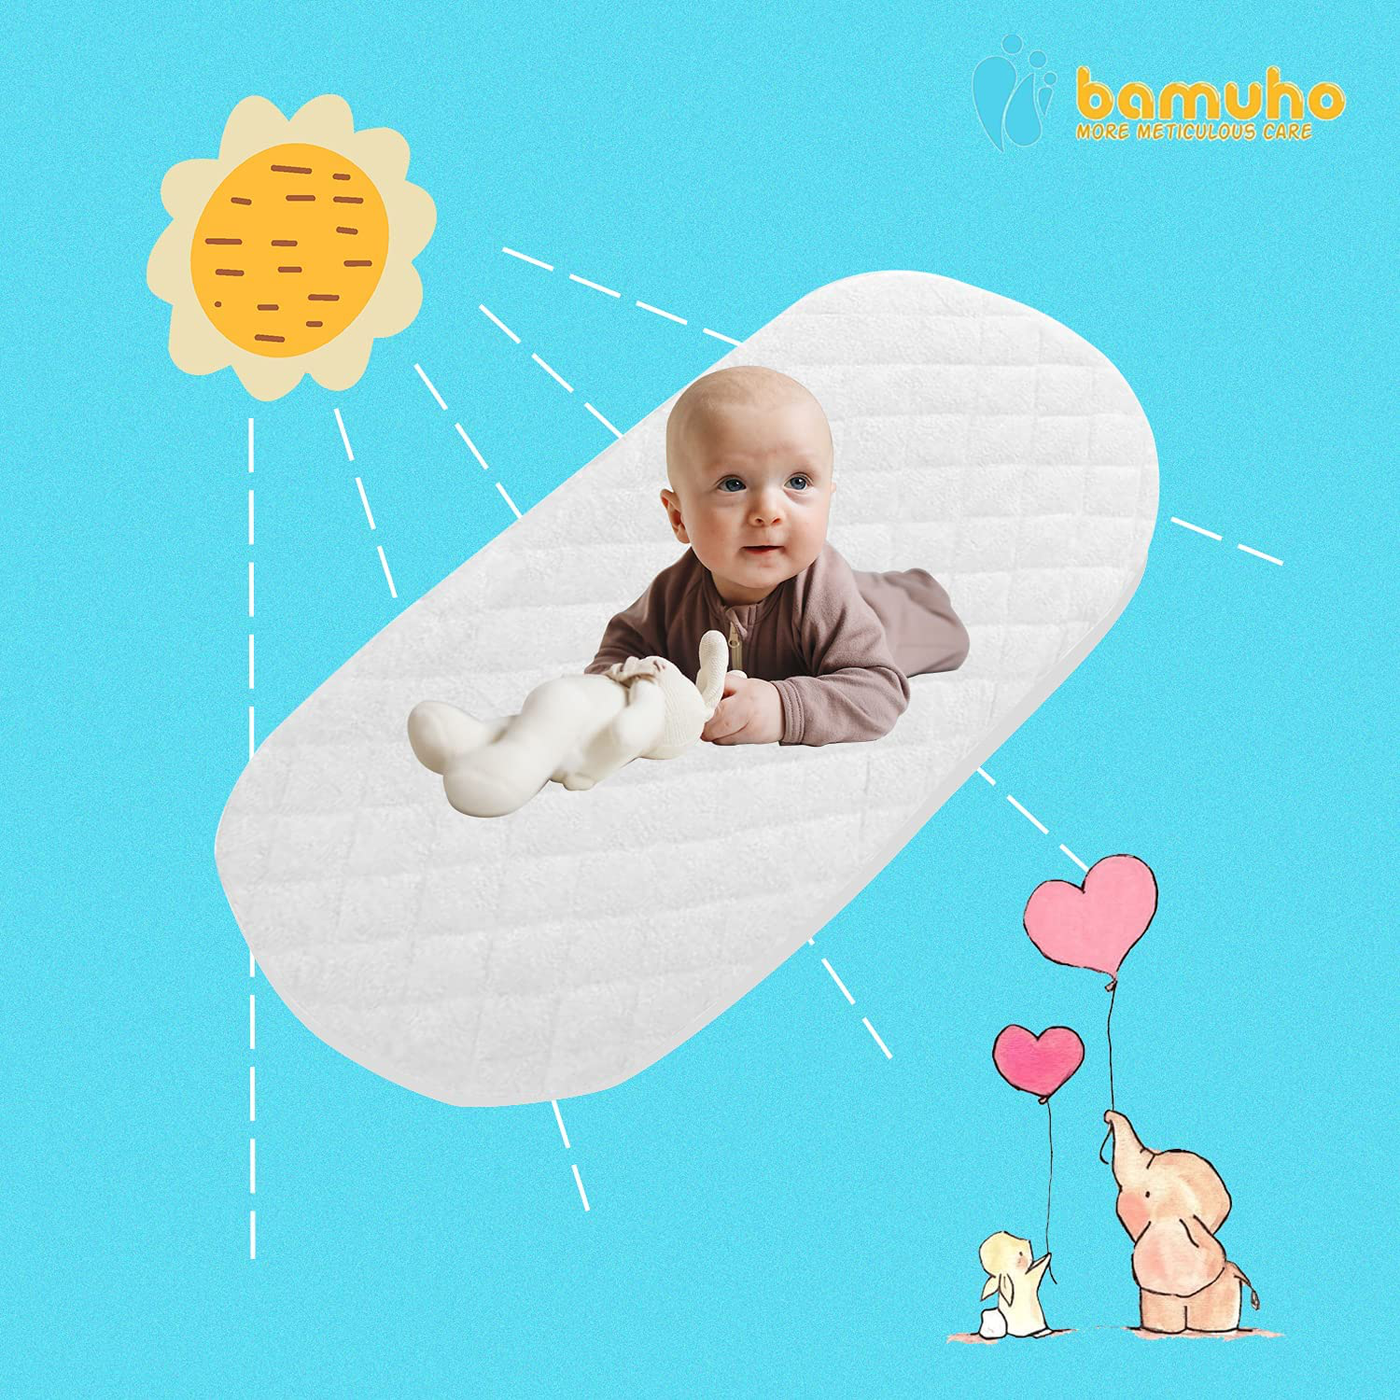 Bamuho 2 Pack Waterproof Halo Bassinet Mattress Pad Cover/Protector Fit Hourglass Swivel Sleeper Mattress Pad, Comfortable and Soft Bamboo Fabric，White